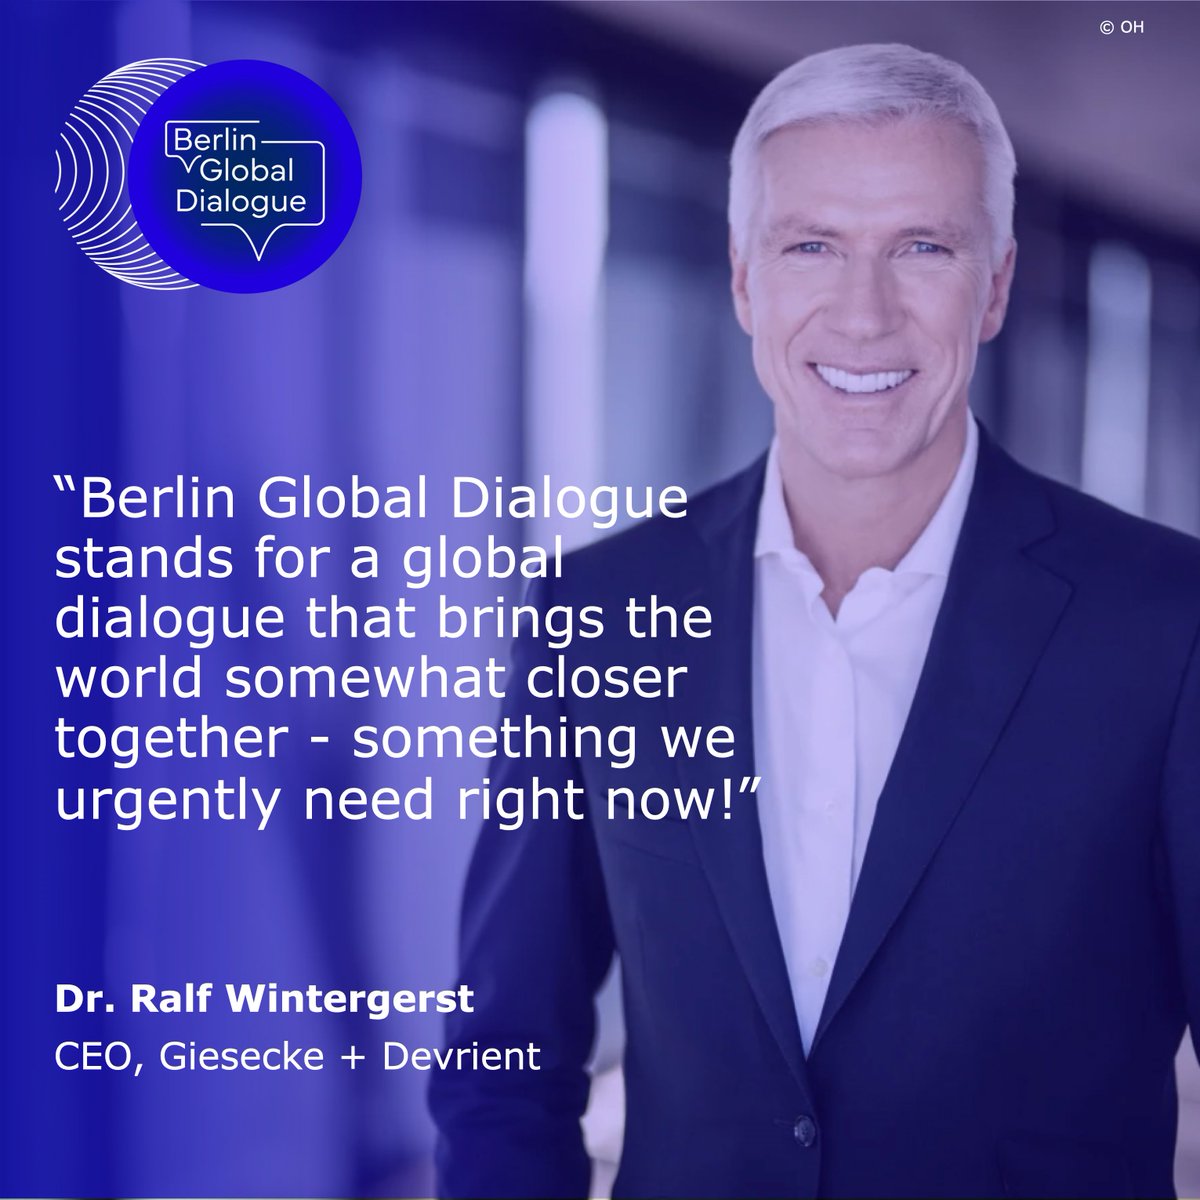 We are thrilled that @RalfWintergerst, CEO of Giesecke + Devrient, will join us at Berlin Global Dialogue! #BGD2023